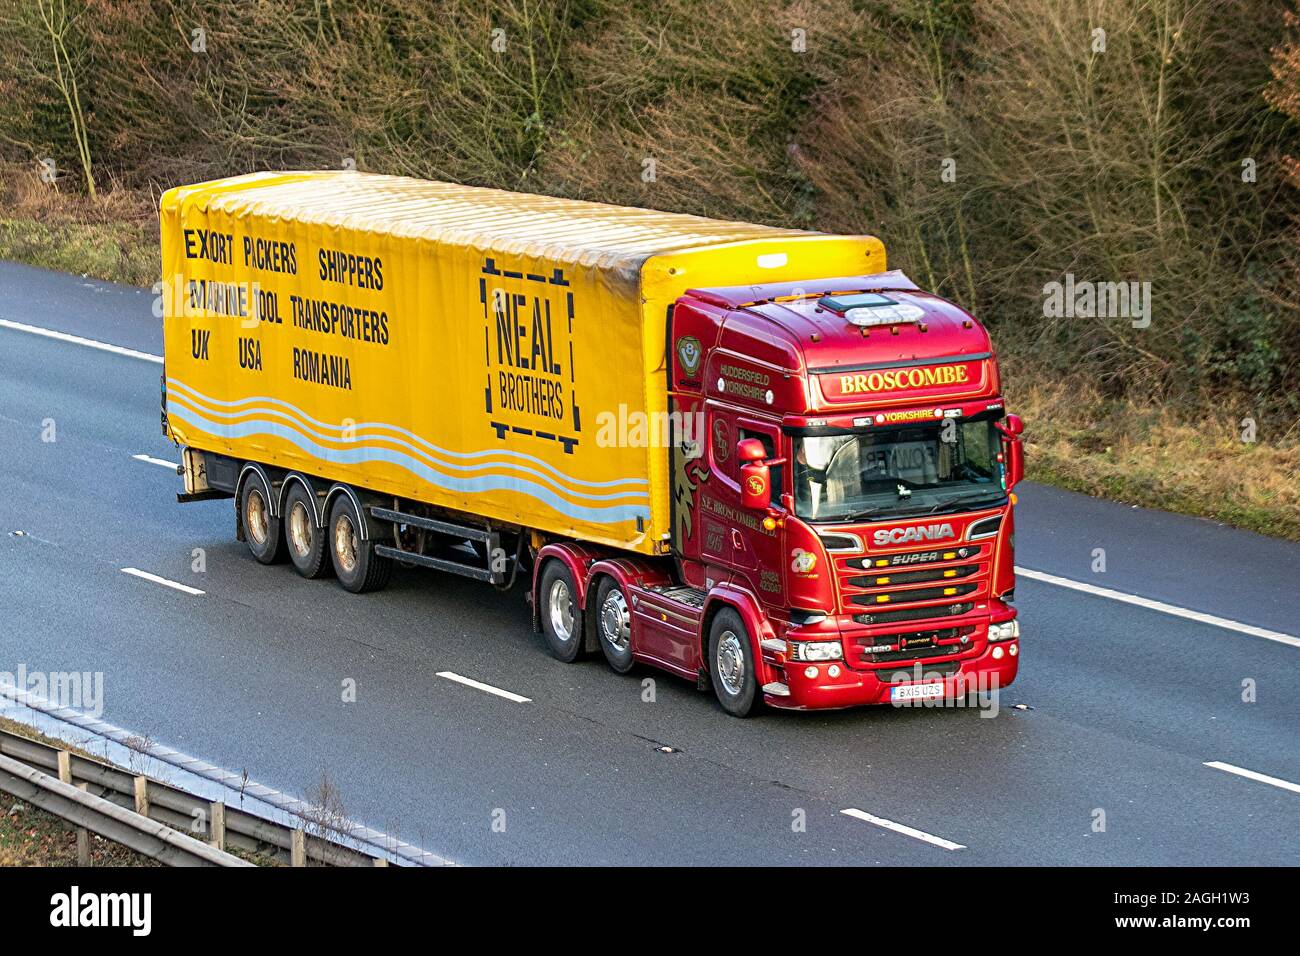 Proscomber Haulage delivery trucks, lorry, transportation, truck, cargo carrier, red Scania super vehicle, European commercial transport, industry, M61 at Manchester, UK Stock Photo